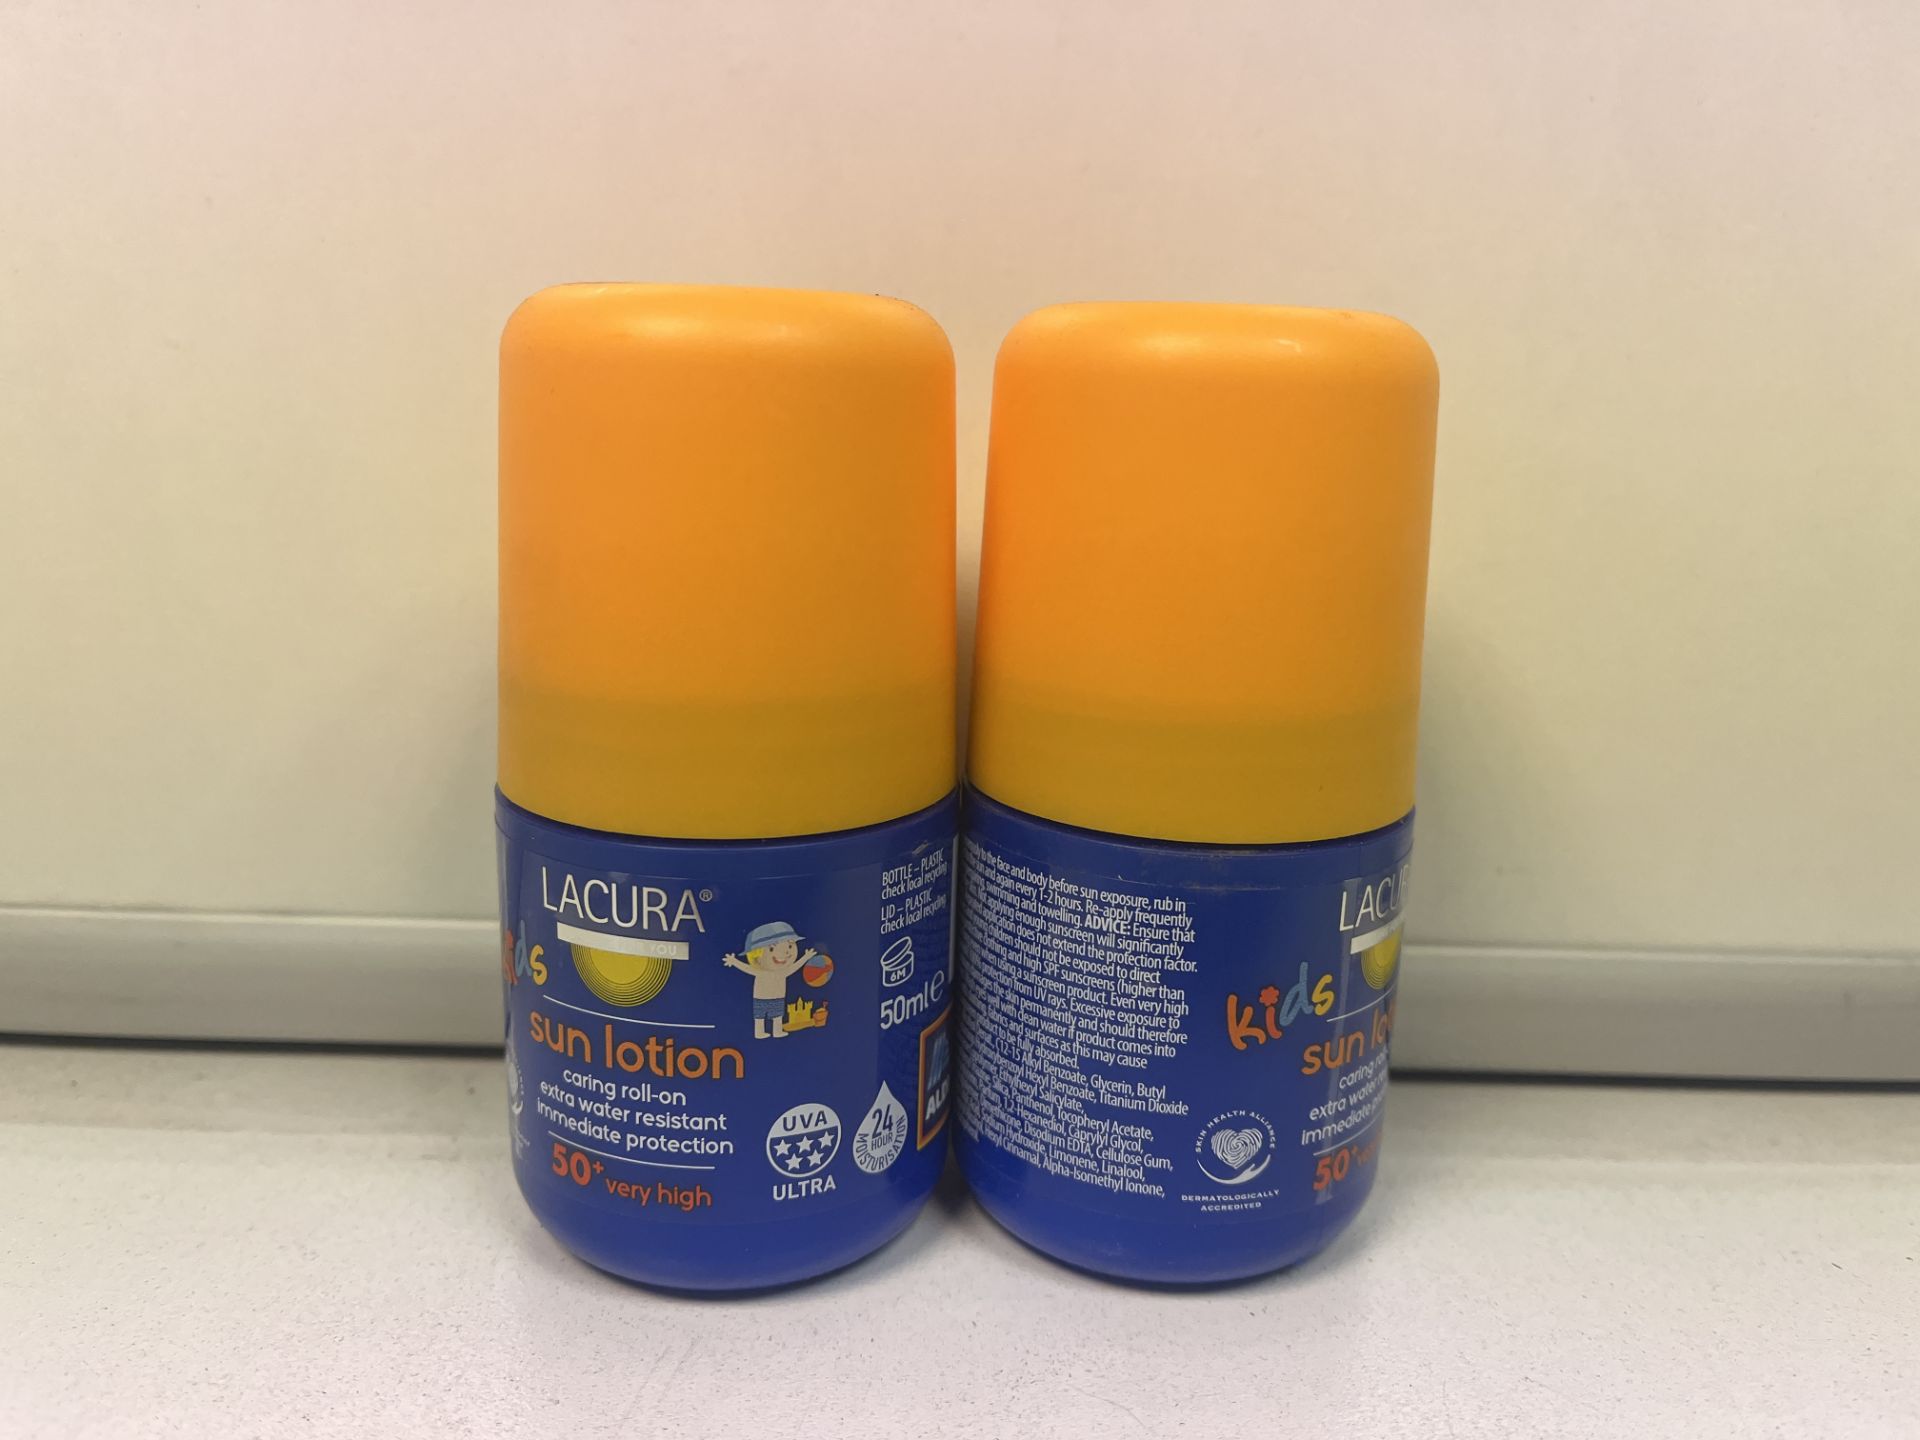 48 X LACURA KIDS SUN LOTION. CARING ROLL ON. EXTRA WATER RESISTANT. IMMEDIATE PROTECTION. 50+ VERY